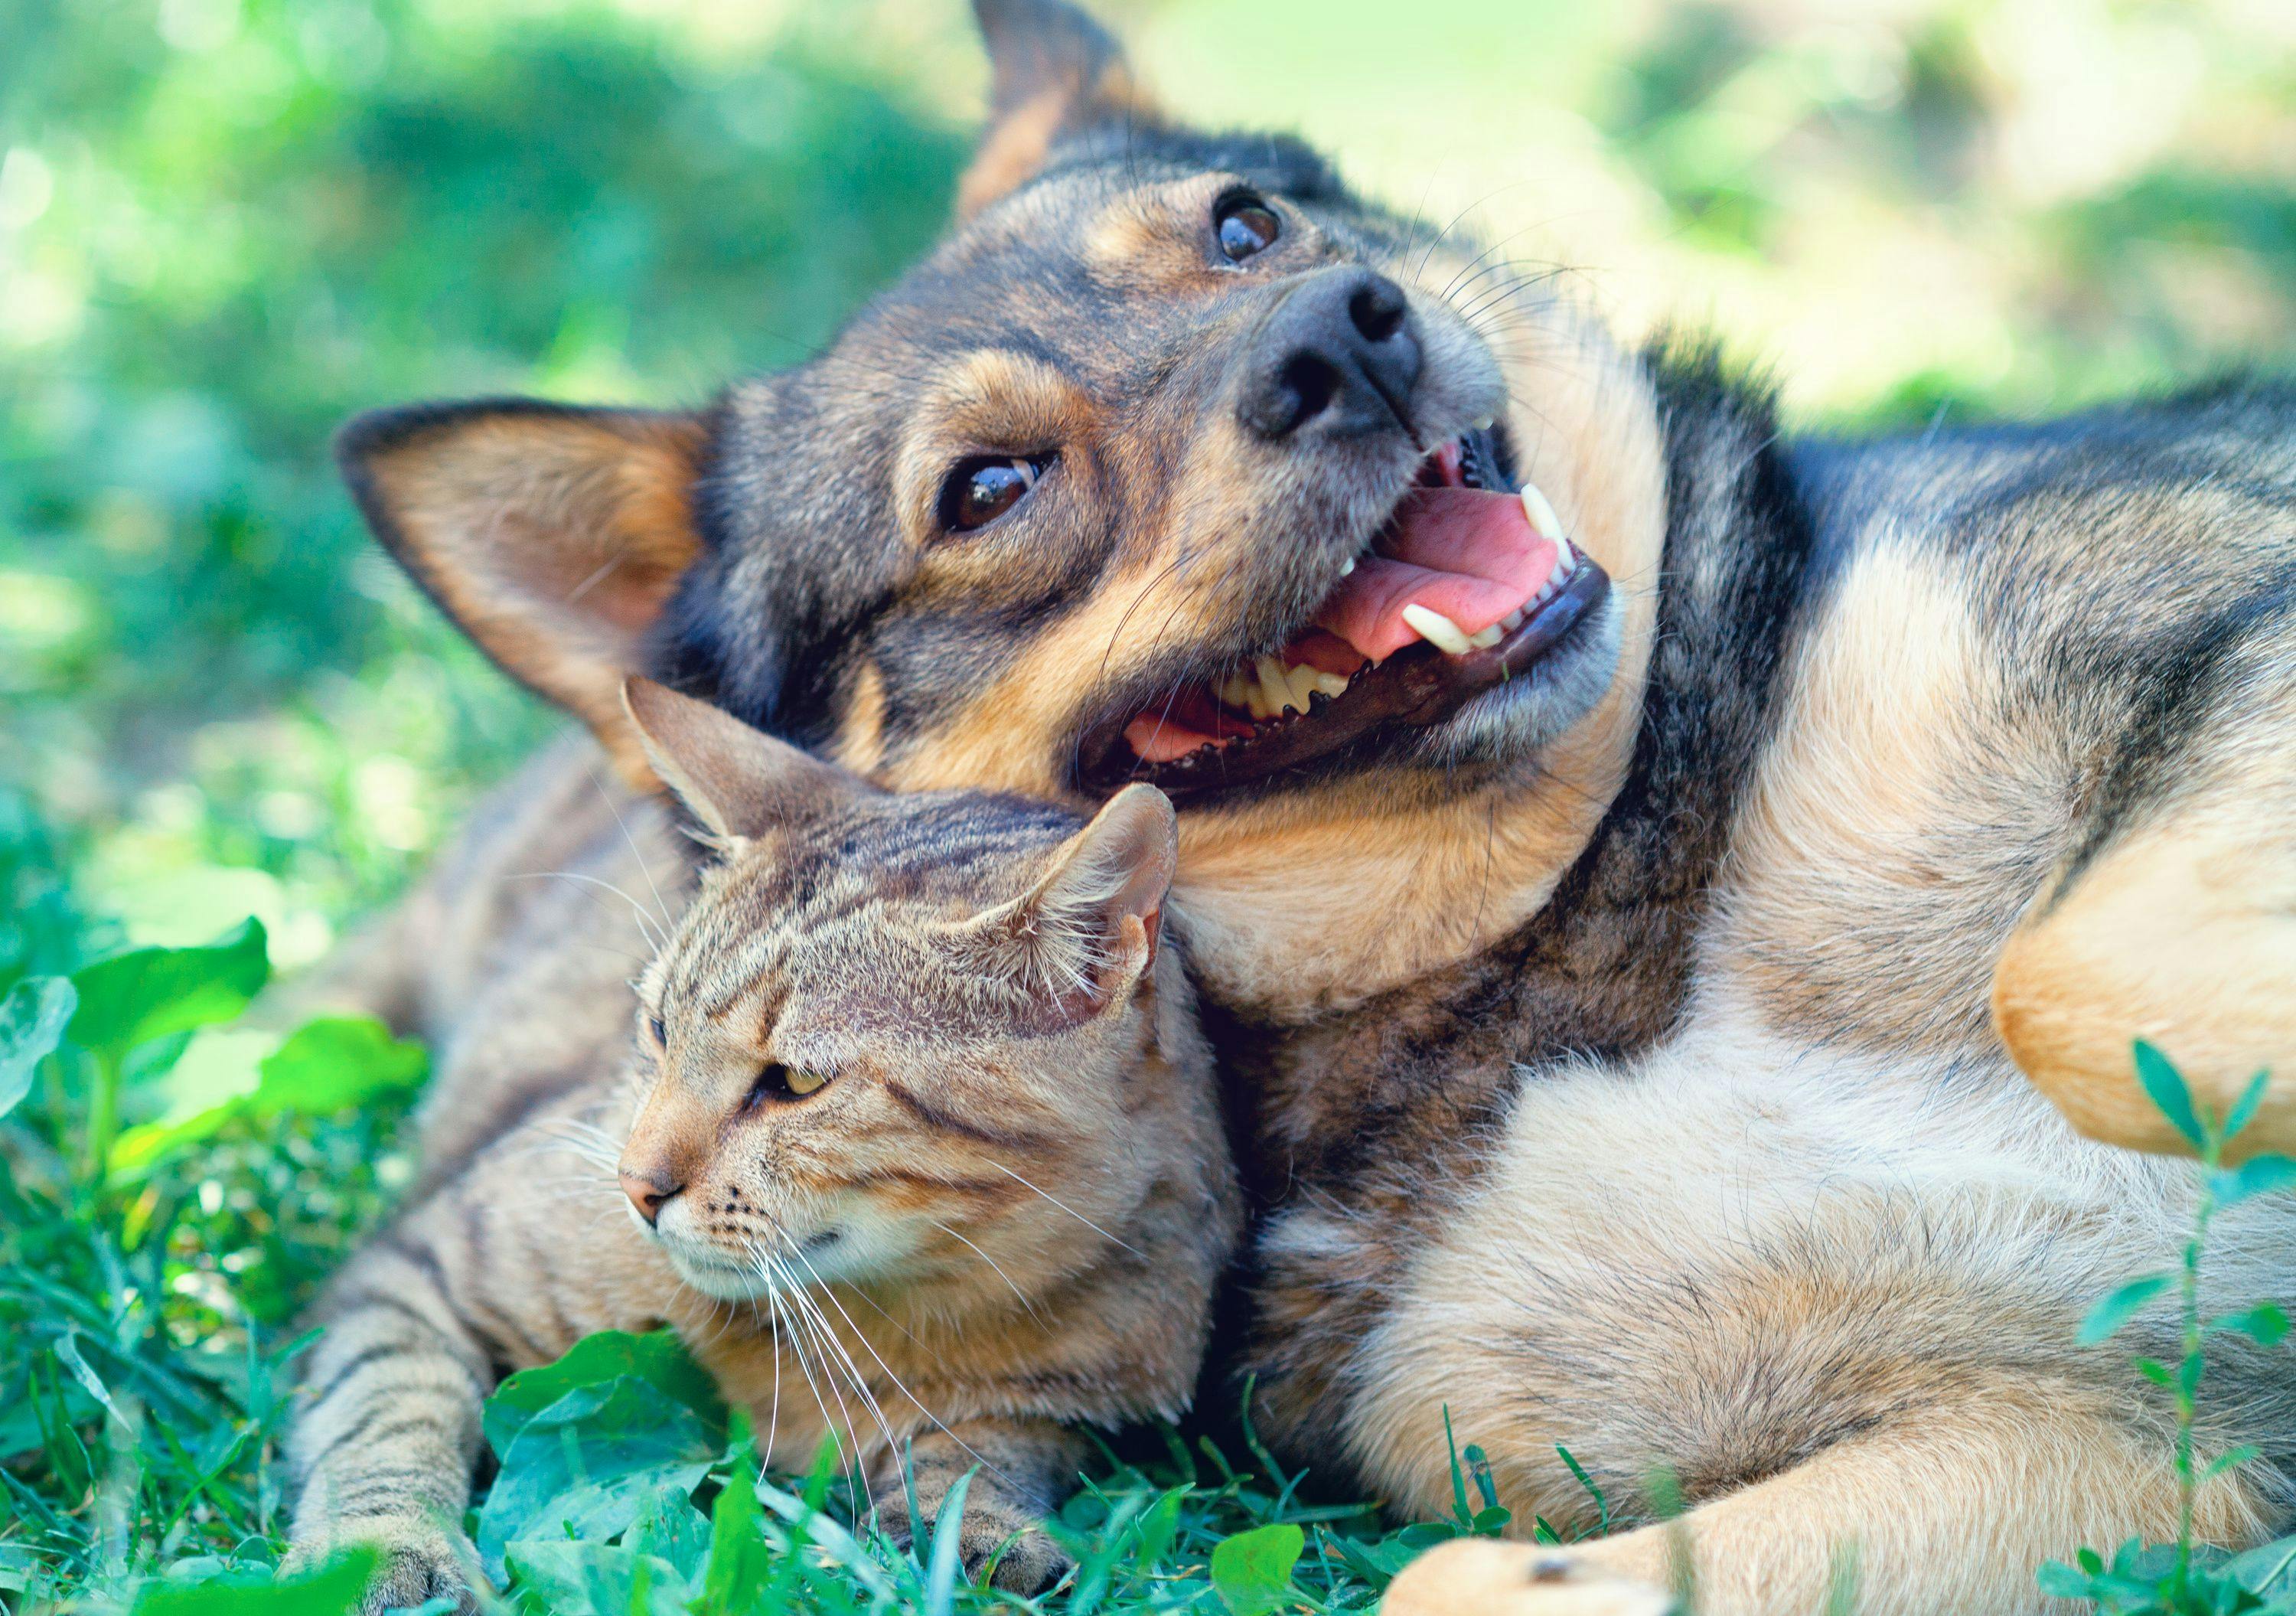 Pet insurance proves valuable to many clients